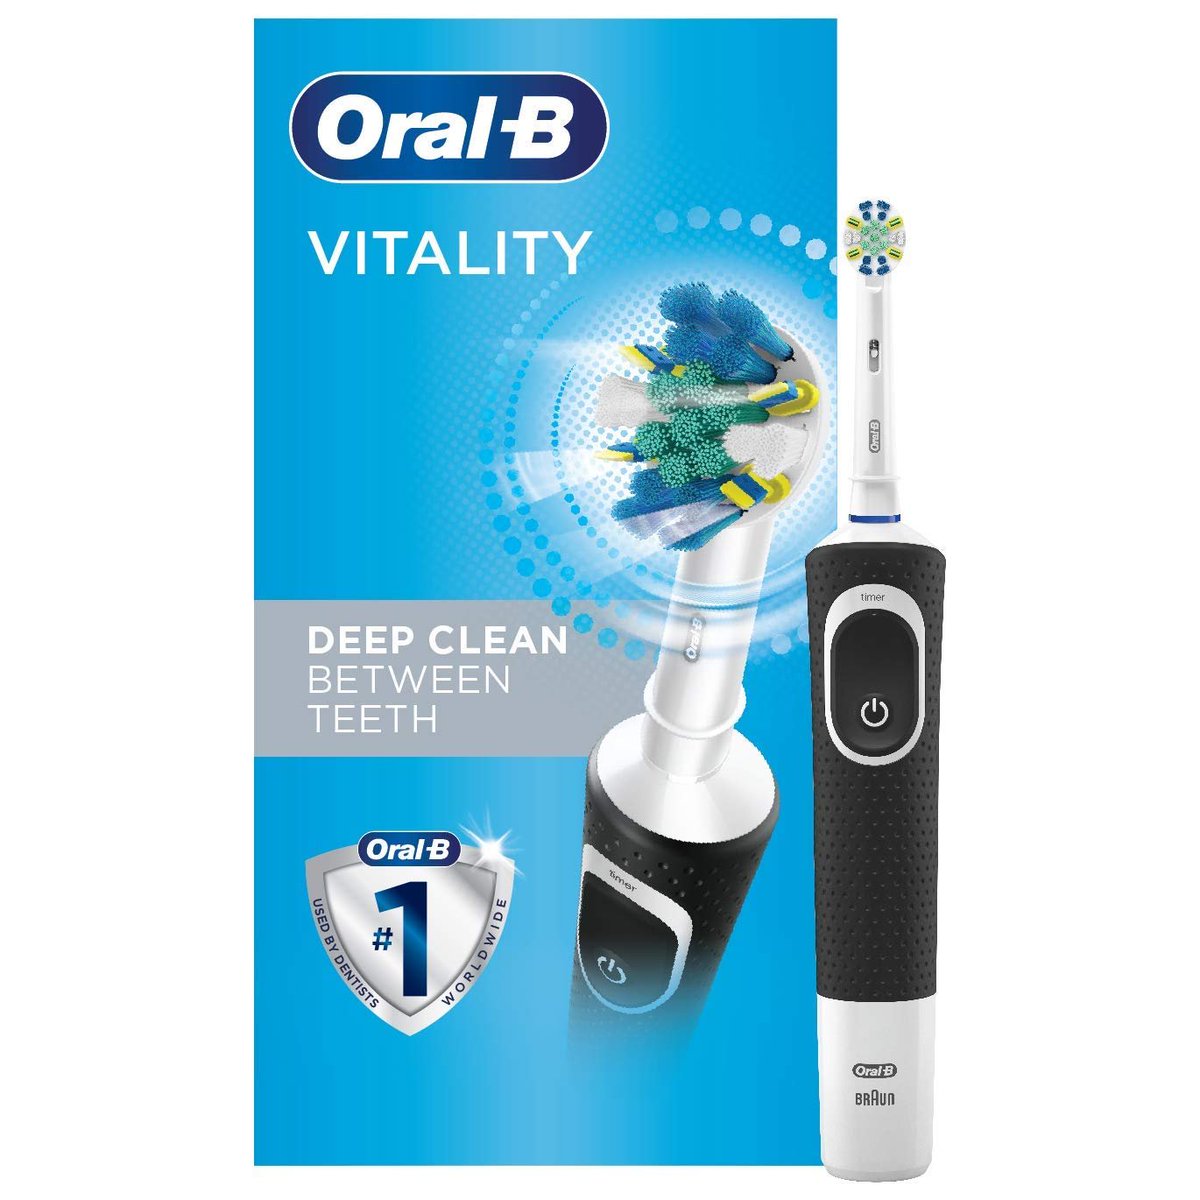 People are making DOCTOR'S SALARIES selling toothbrushes like this on Amazon

Let me explain how they do, and you can too. 

A thread🧵